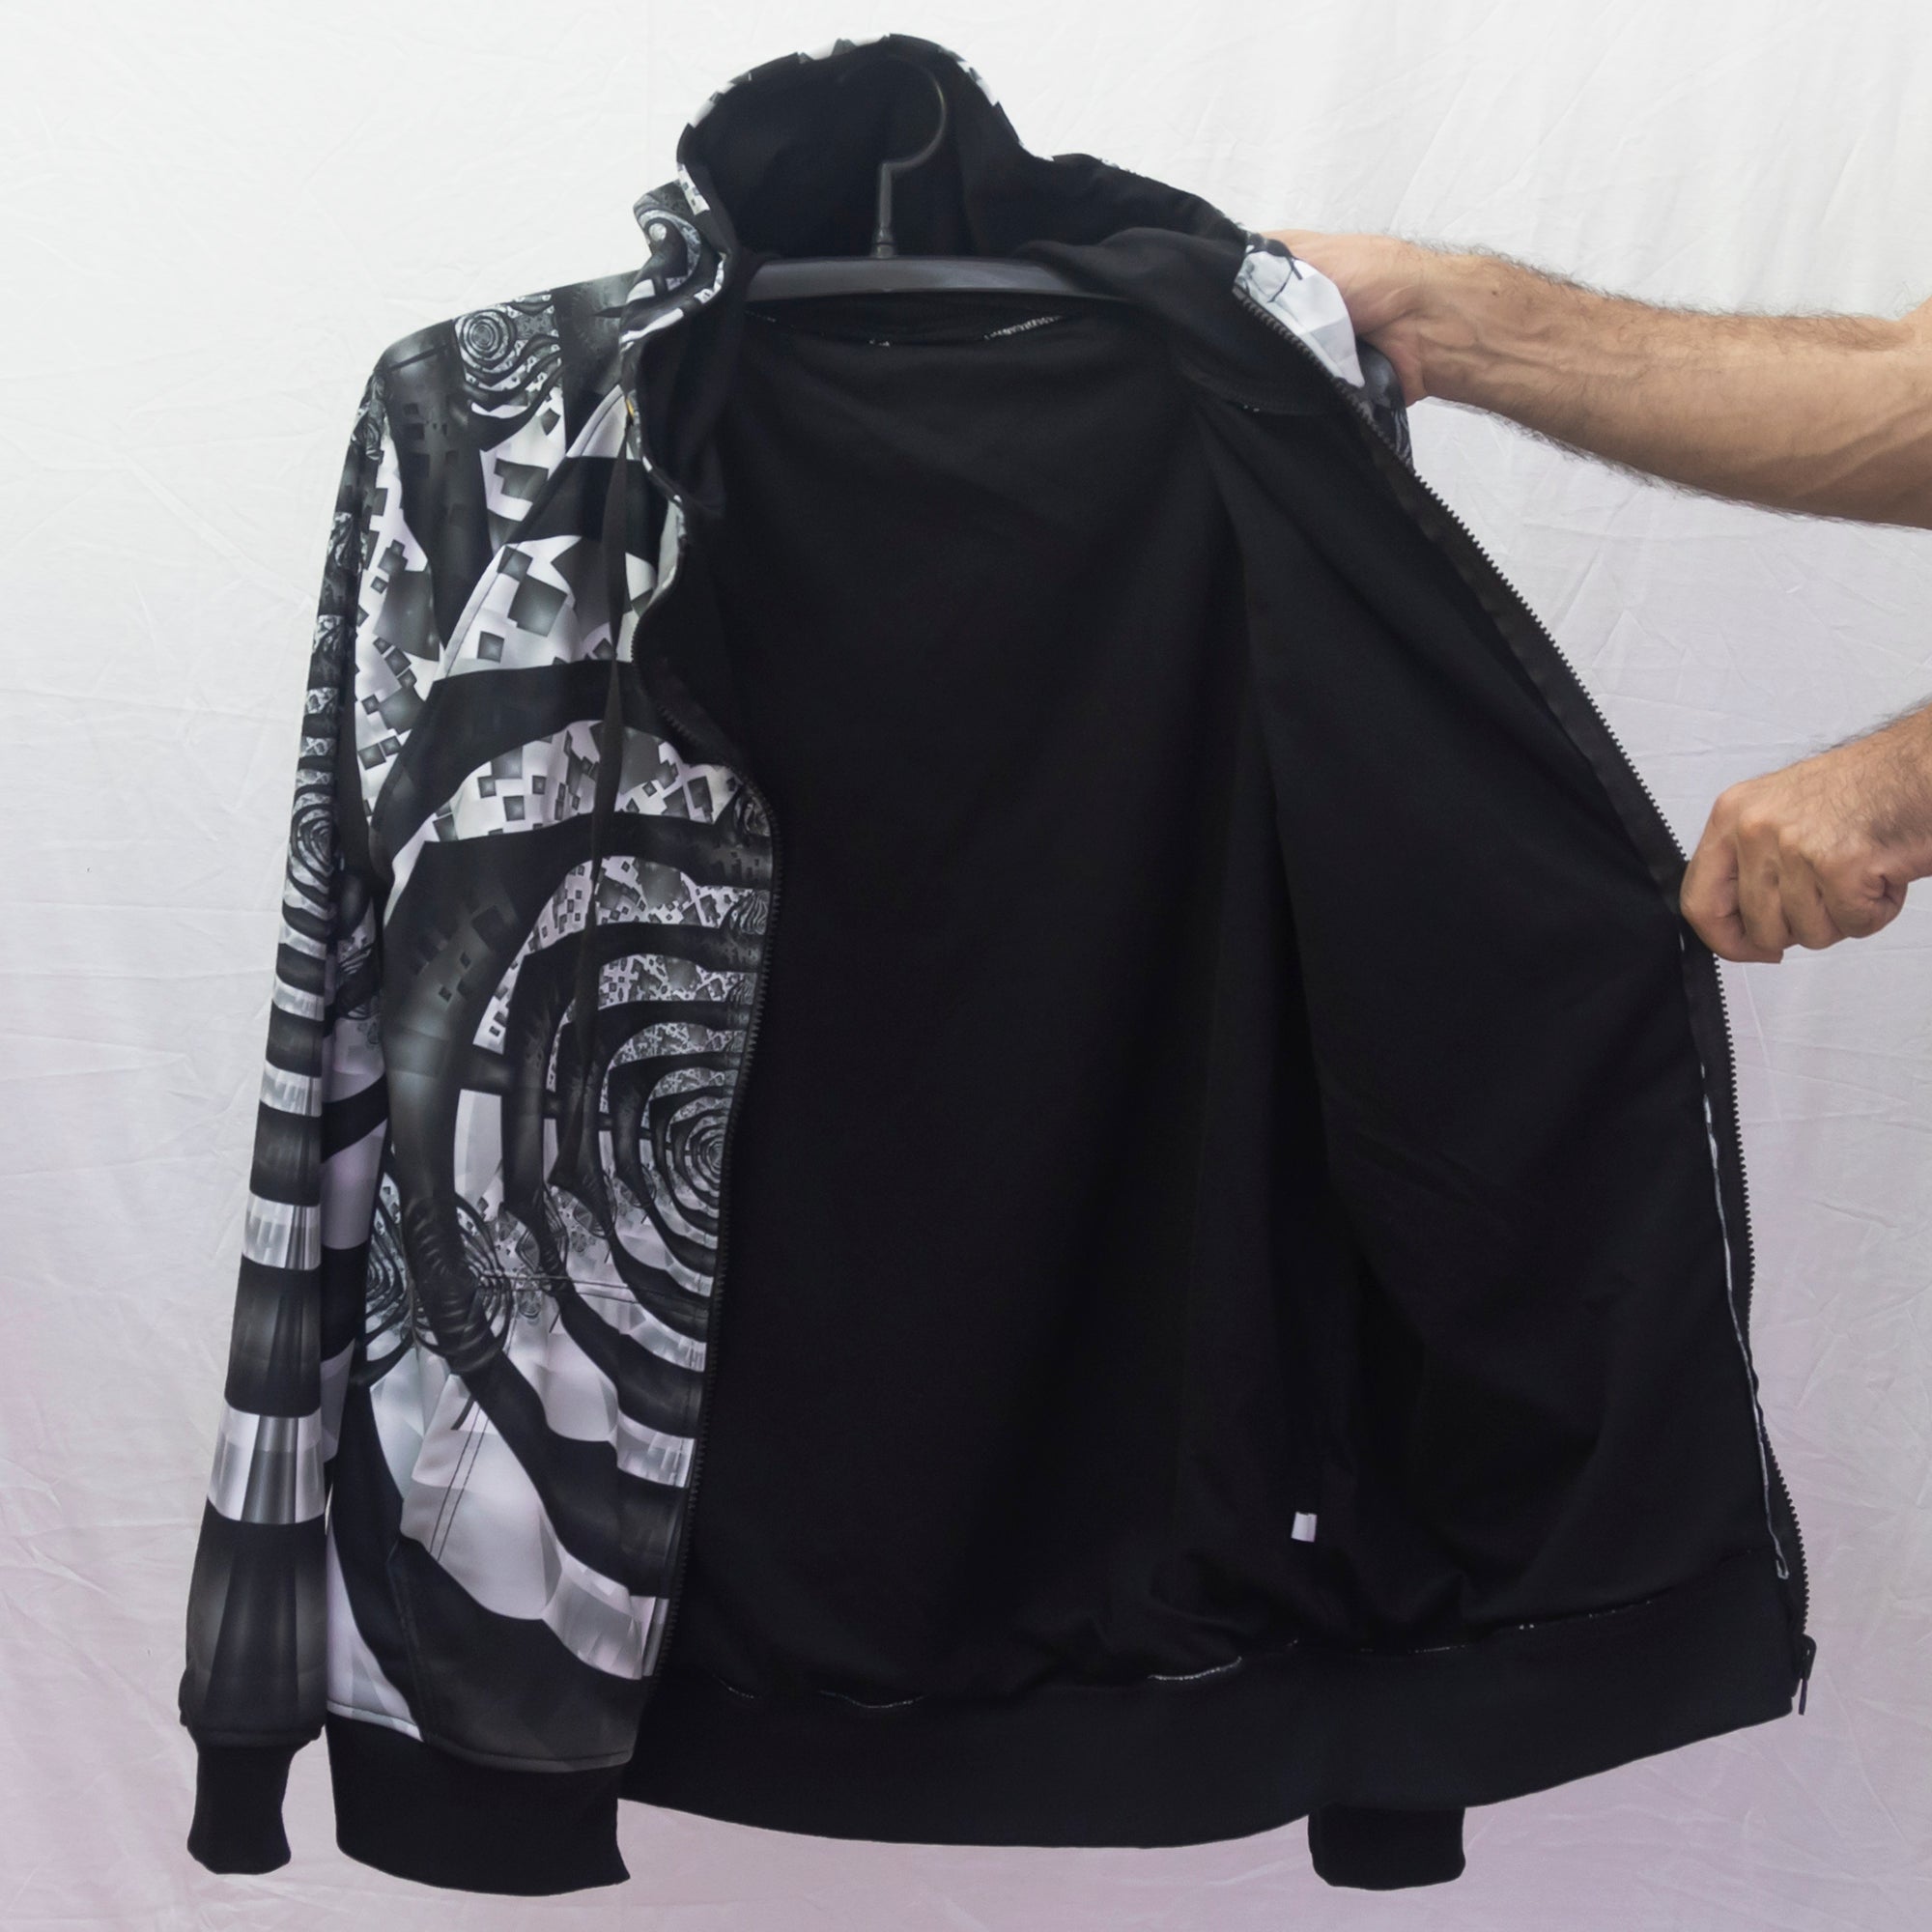 Expansion UV Psychedelic Fractal Hoodie XS